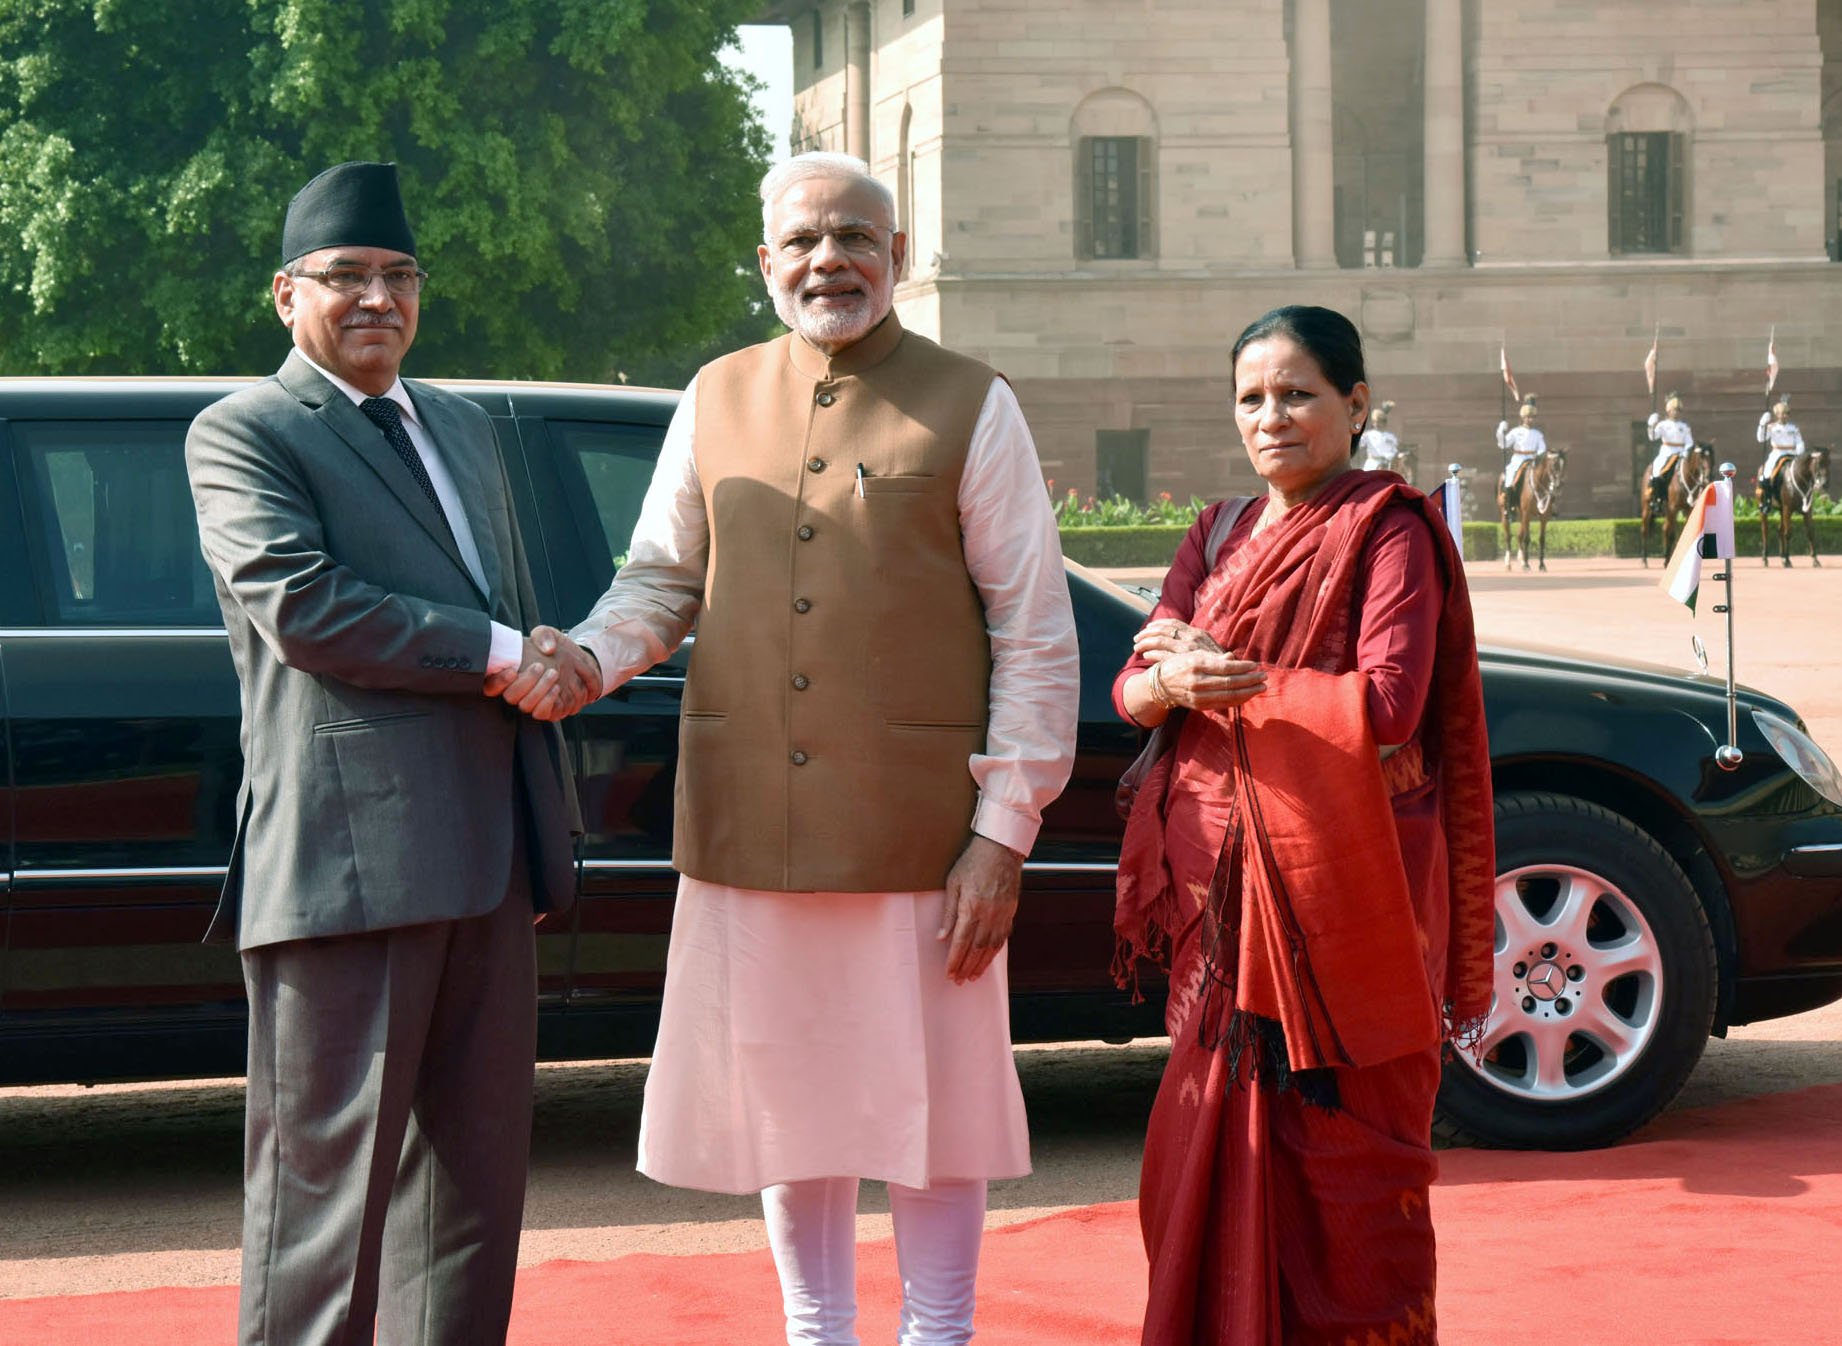 The_Prime_Minister_of_Nepal,_Mr._Pushpa_Kamal_Dahal_and_Mrs._Sita_Dahal_being_received_by_the_Prime_Minister,_Shri_Narendra_Modi,_at_the_Ceremonial_Reception,_at_Rashtrapati_Bhavan,_in_New_Delhi_on_September_16,_2